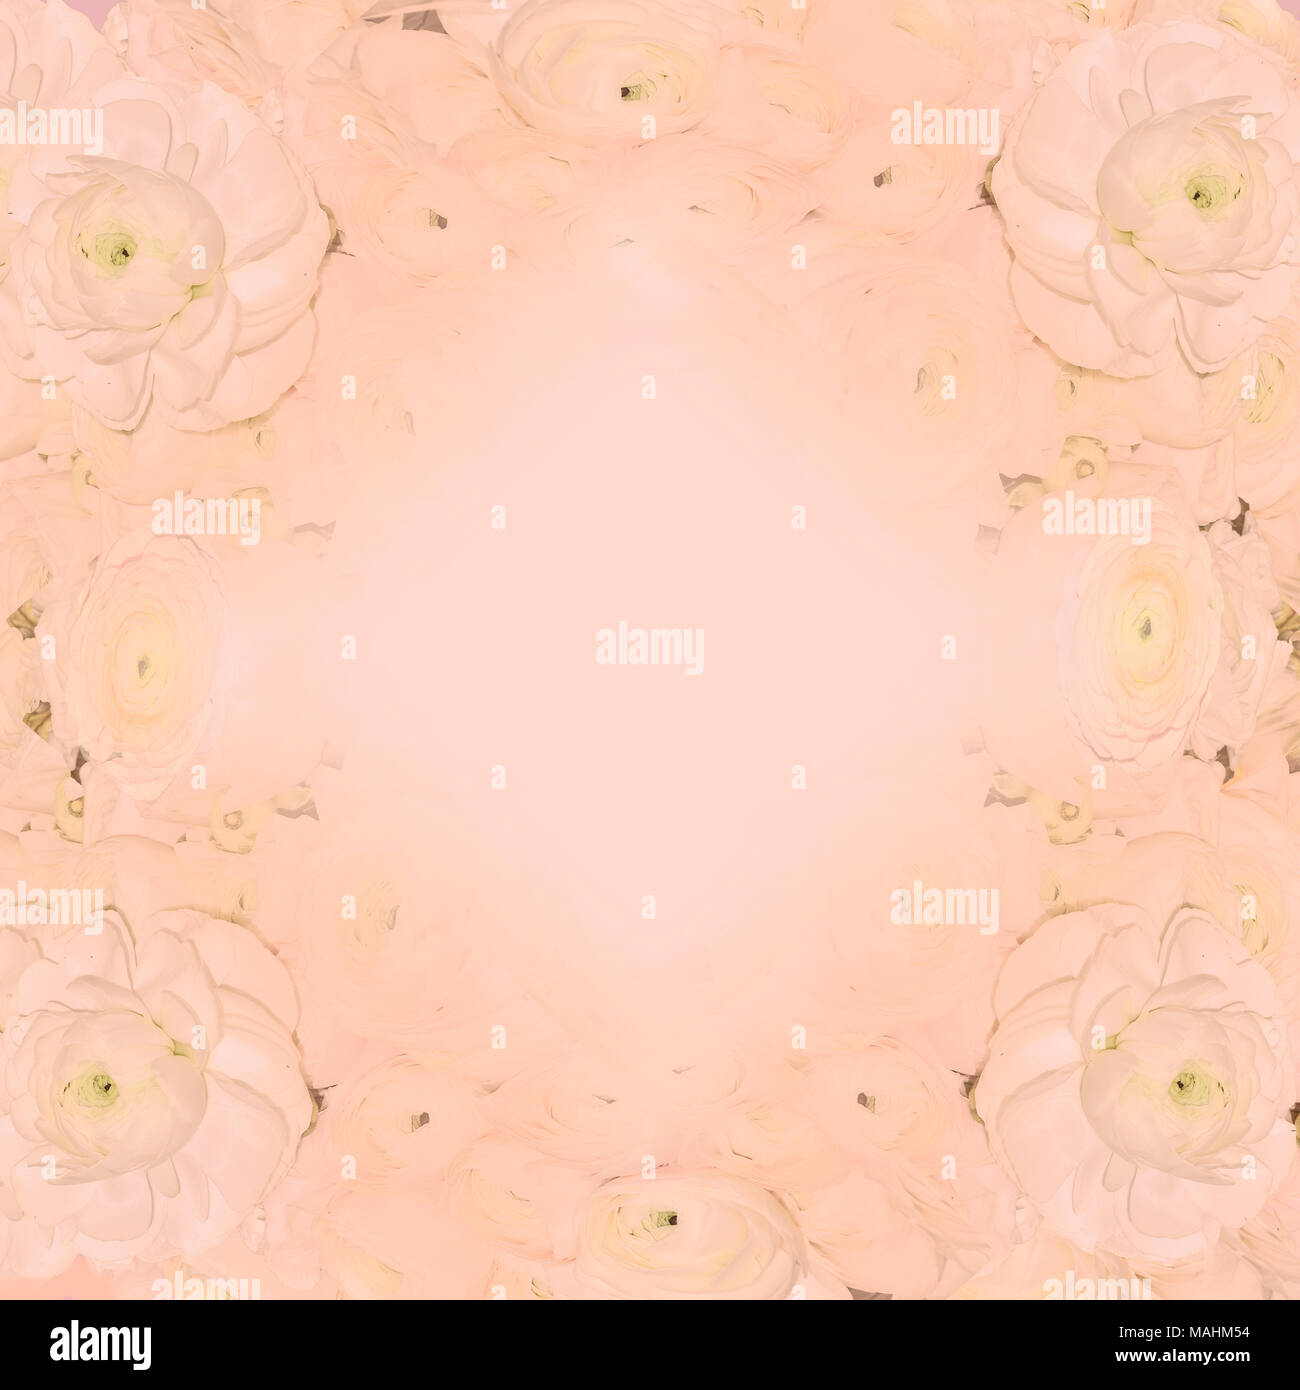 Delicate pastel creamy-pink festive floral frame with pale pink ranunculus flowers - soft spring or summer blurred, toned background with space for te Stock Photo